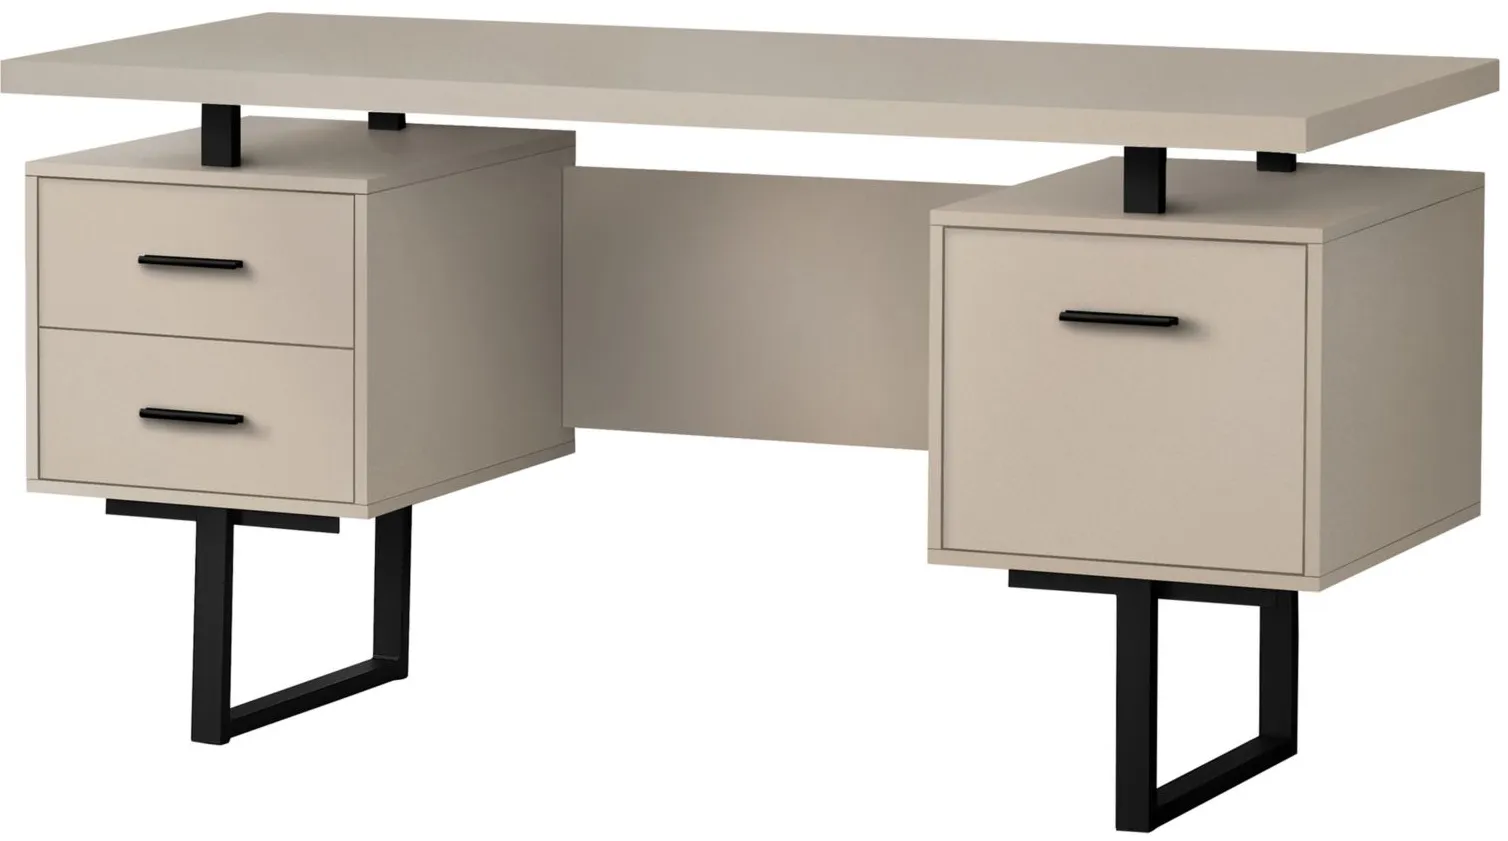 Grover Computer Desk with Floating Desktop in Taupe by Monarch Specialties